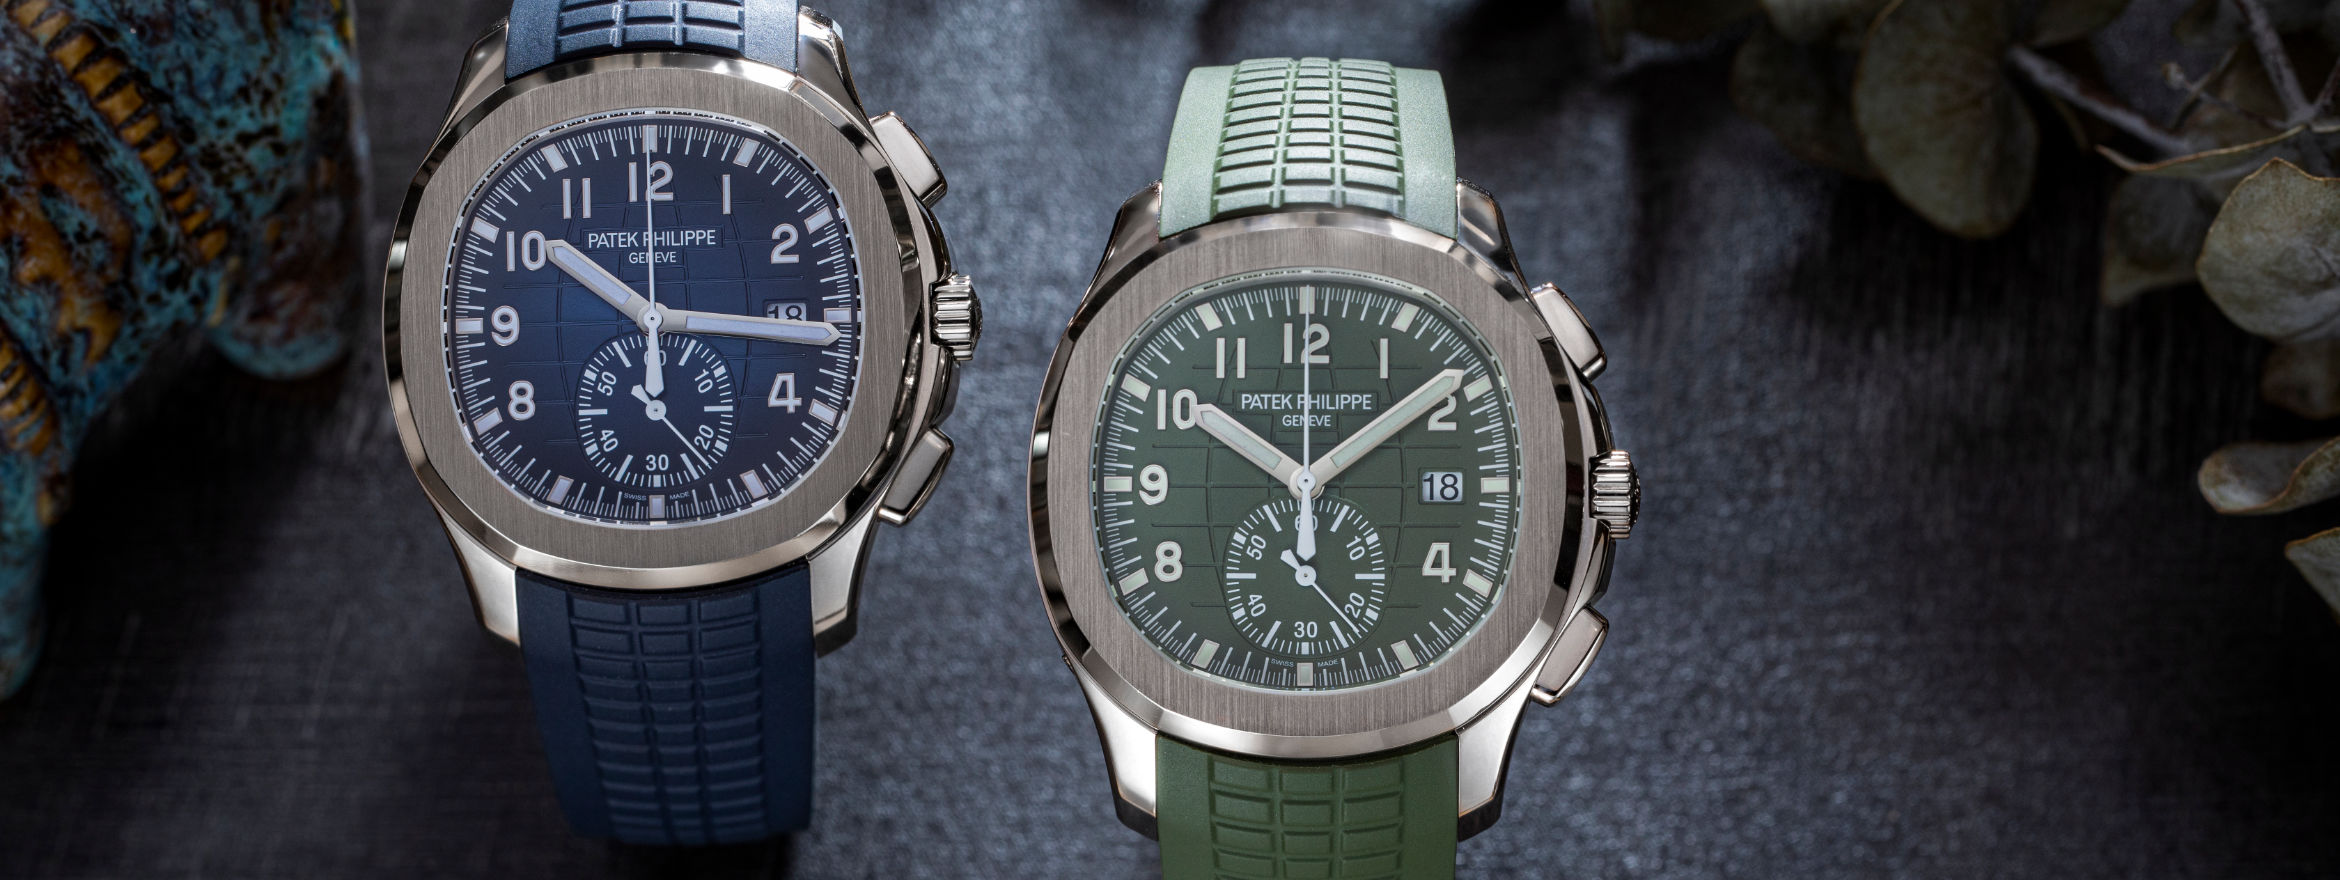 A Review Of The Patek Philippe Aquanaut Flyback Chronograph Ref.5968G